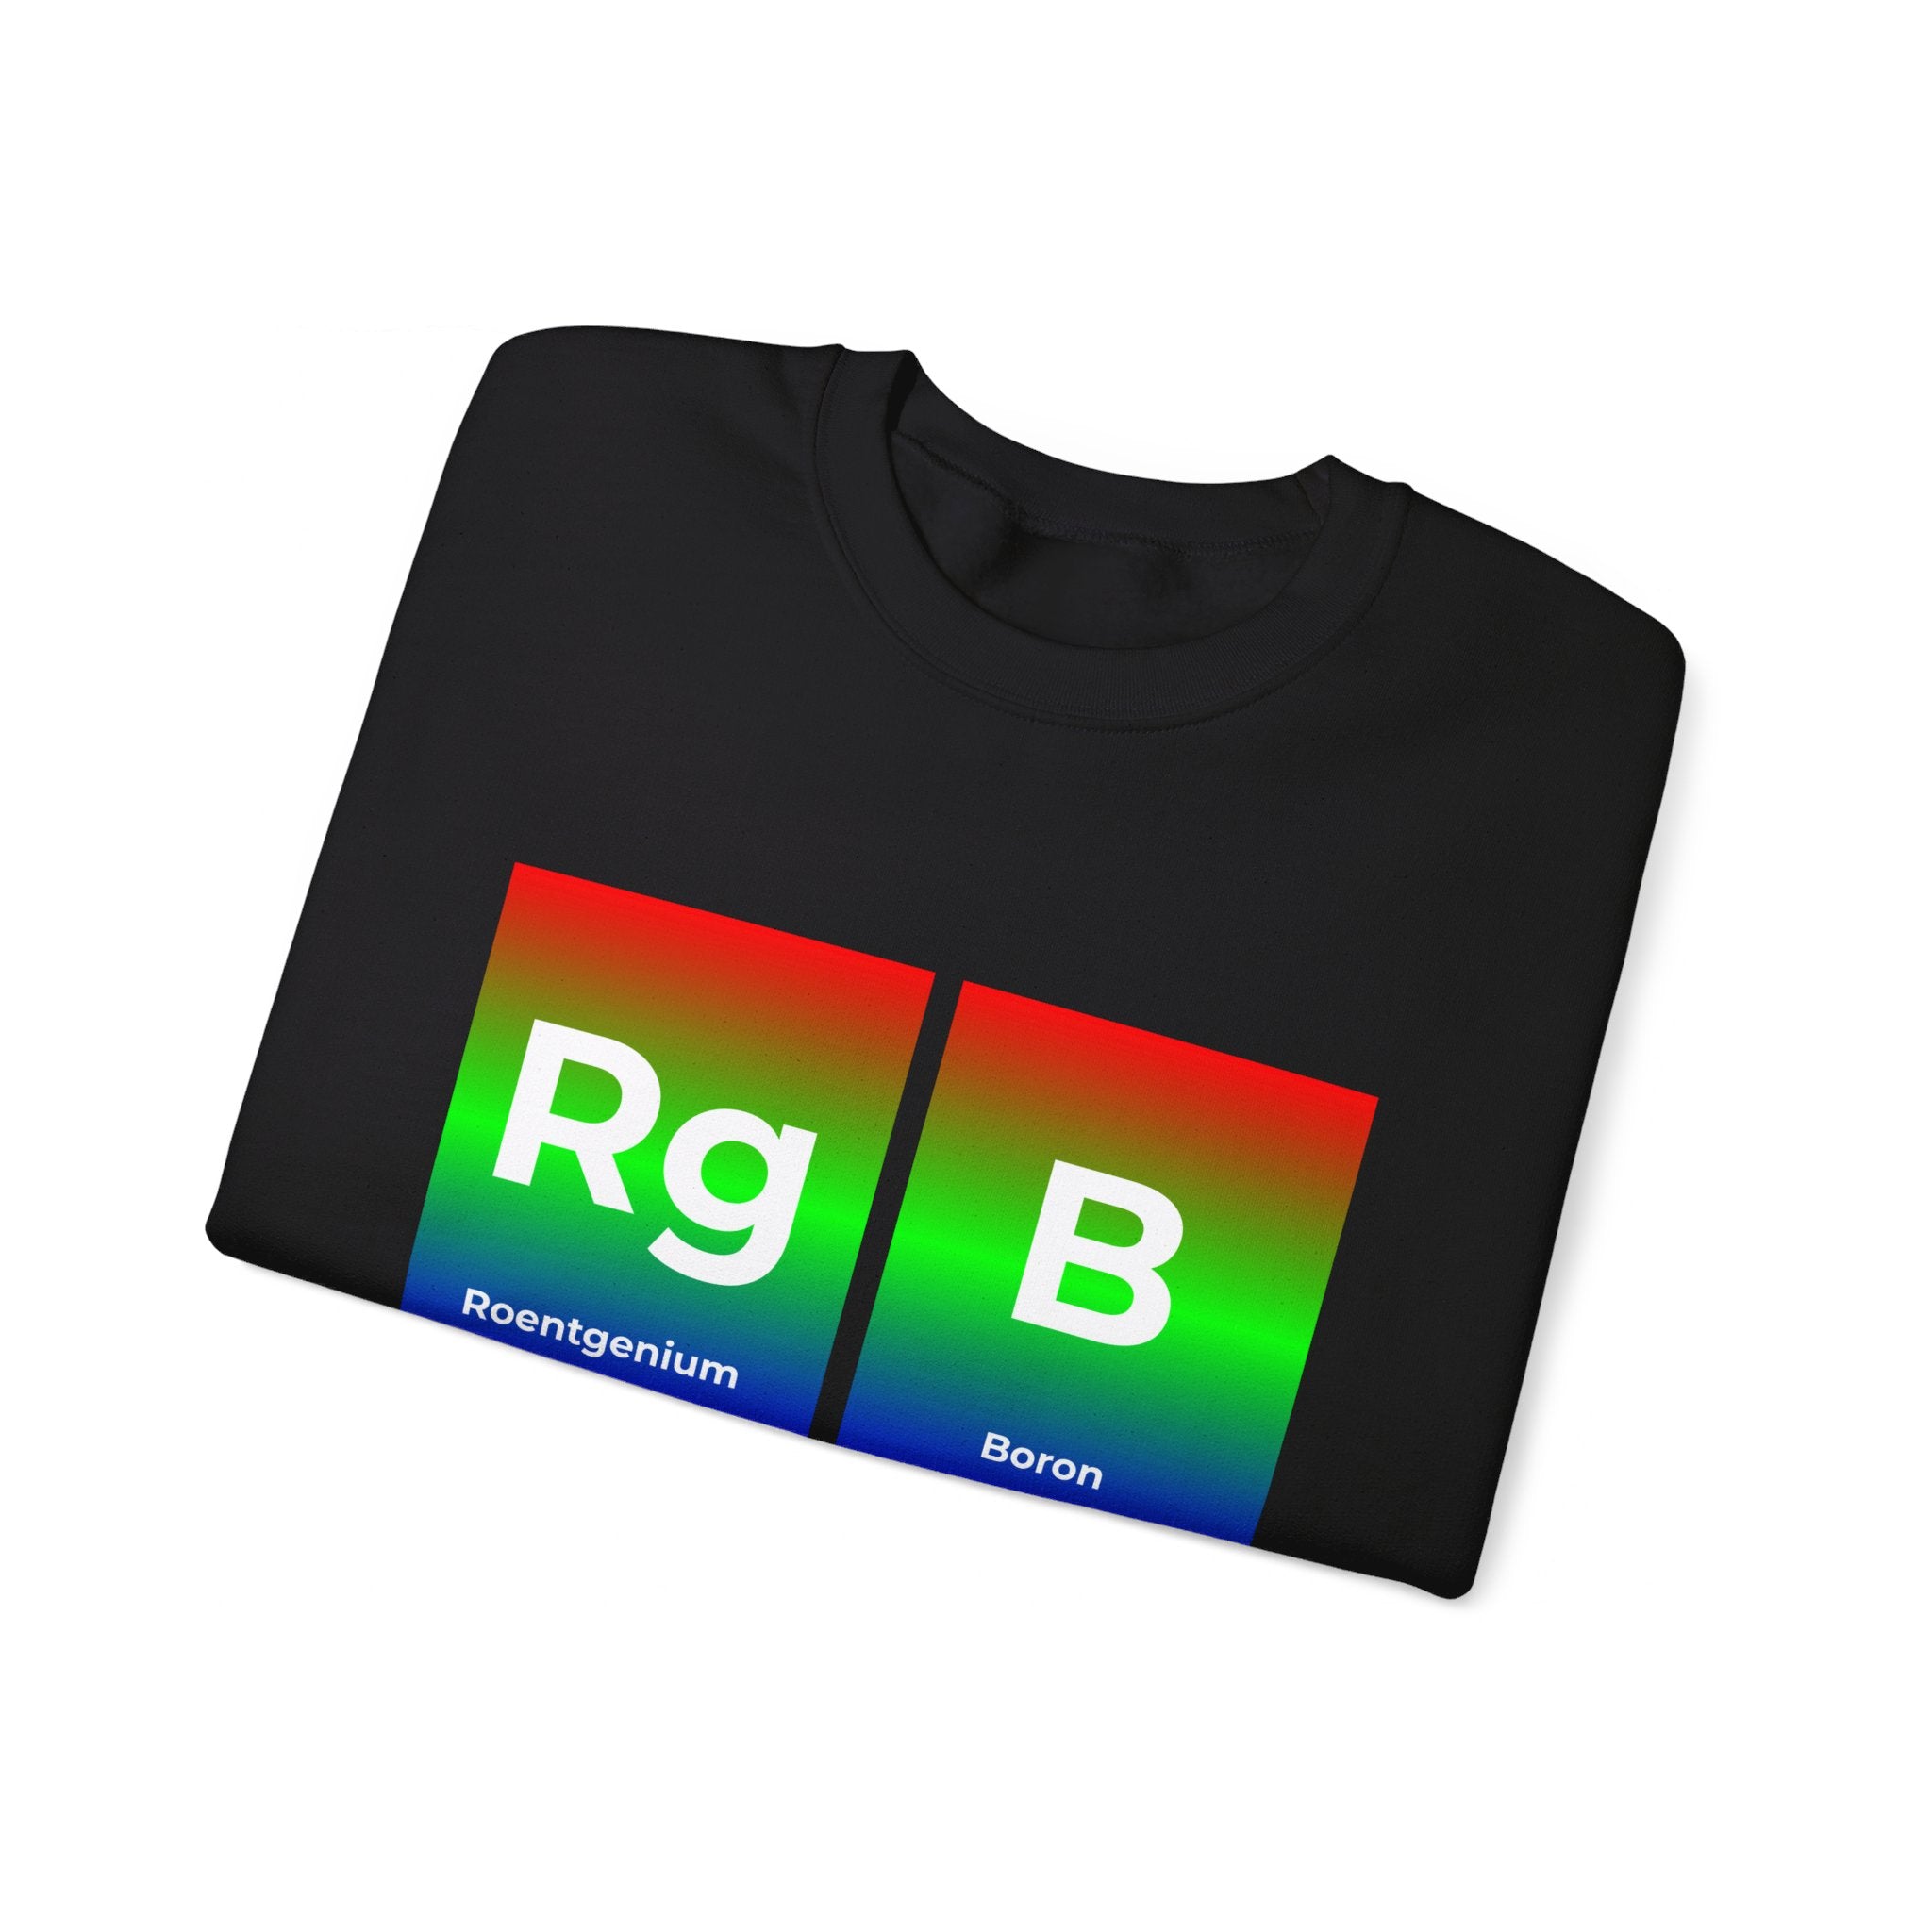 A black sweatshirt with colorful periodic table elements Roentgenium (Rg) and Boron (B), arranged to spell "RGB." Ideal for comfort lovers, this unique RG-B design merges scientific flair with everyday style.